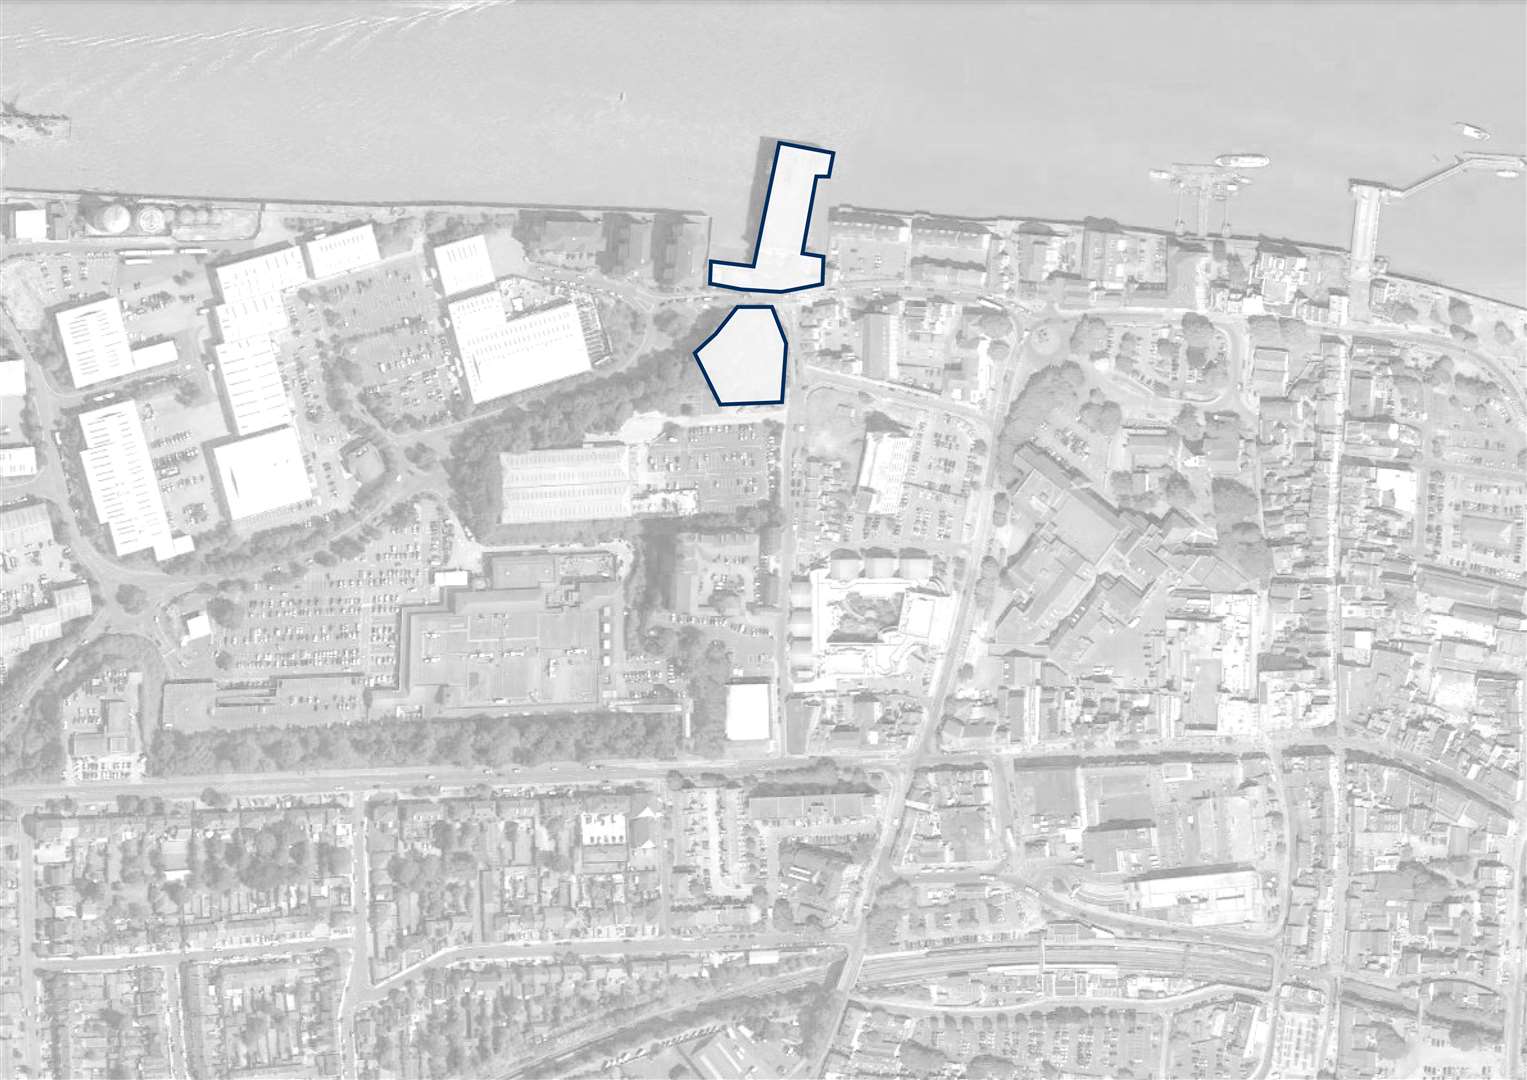 An aerial view of the proposed development site at Clifton Slipways, West Street, Gravesend. The land is shaded white to the north of the picture